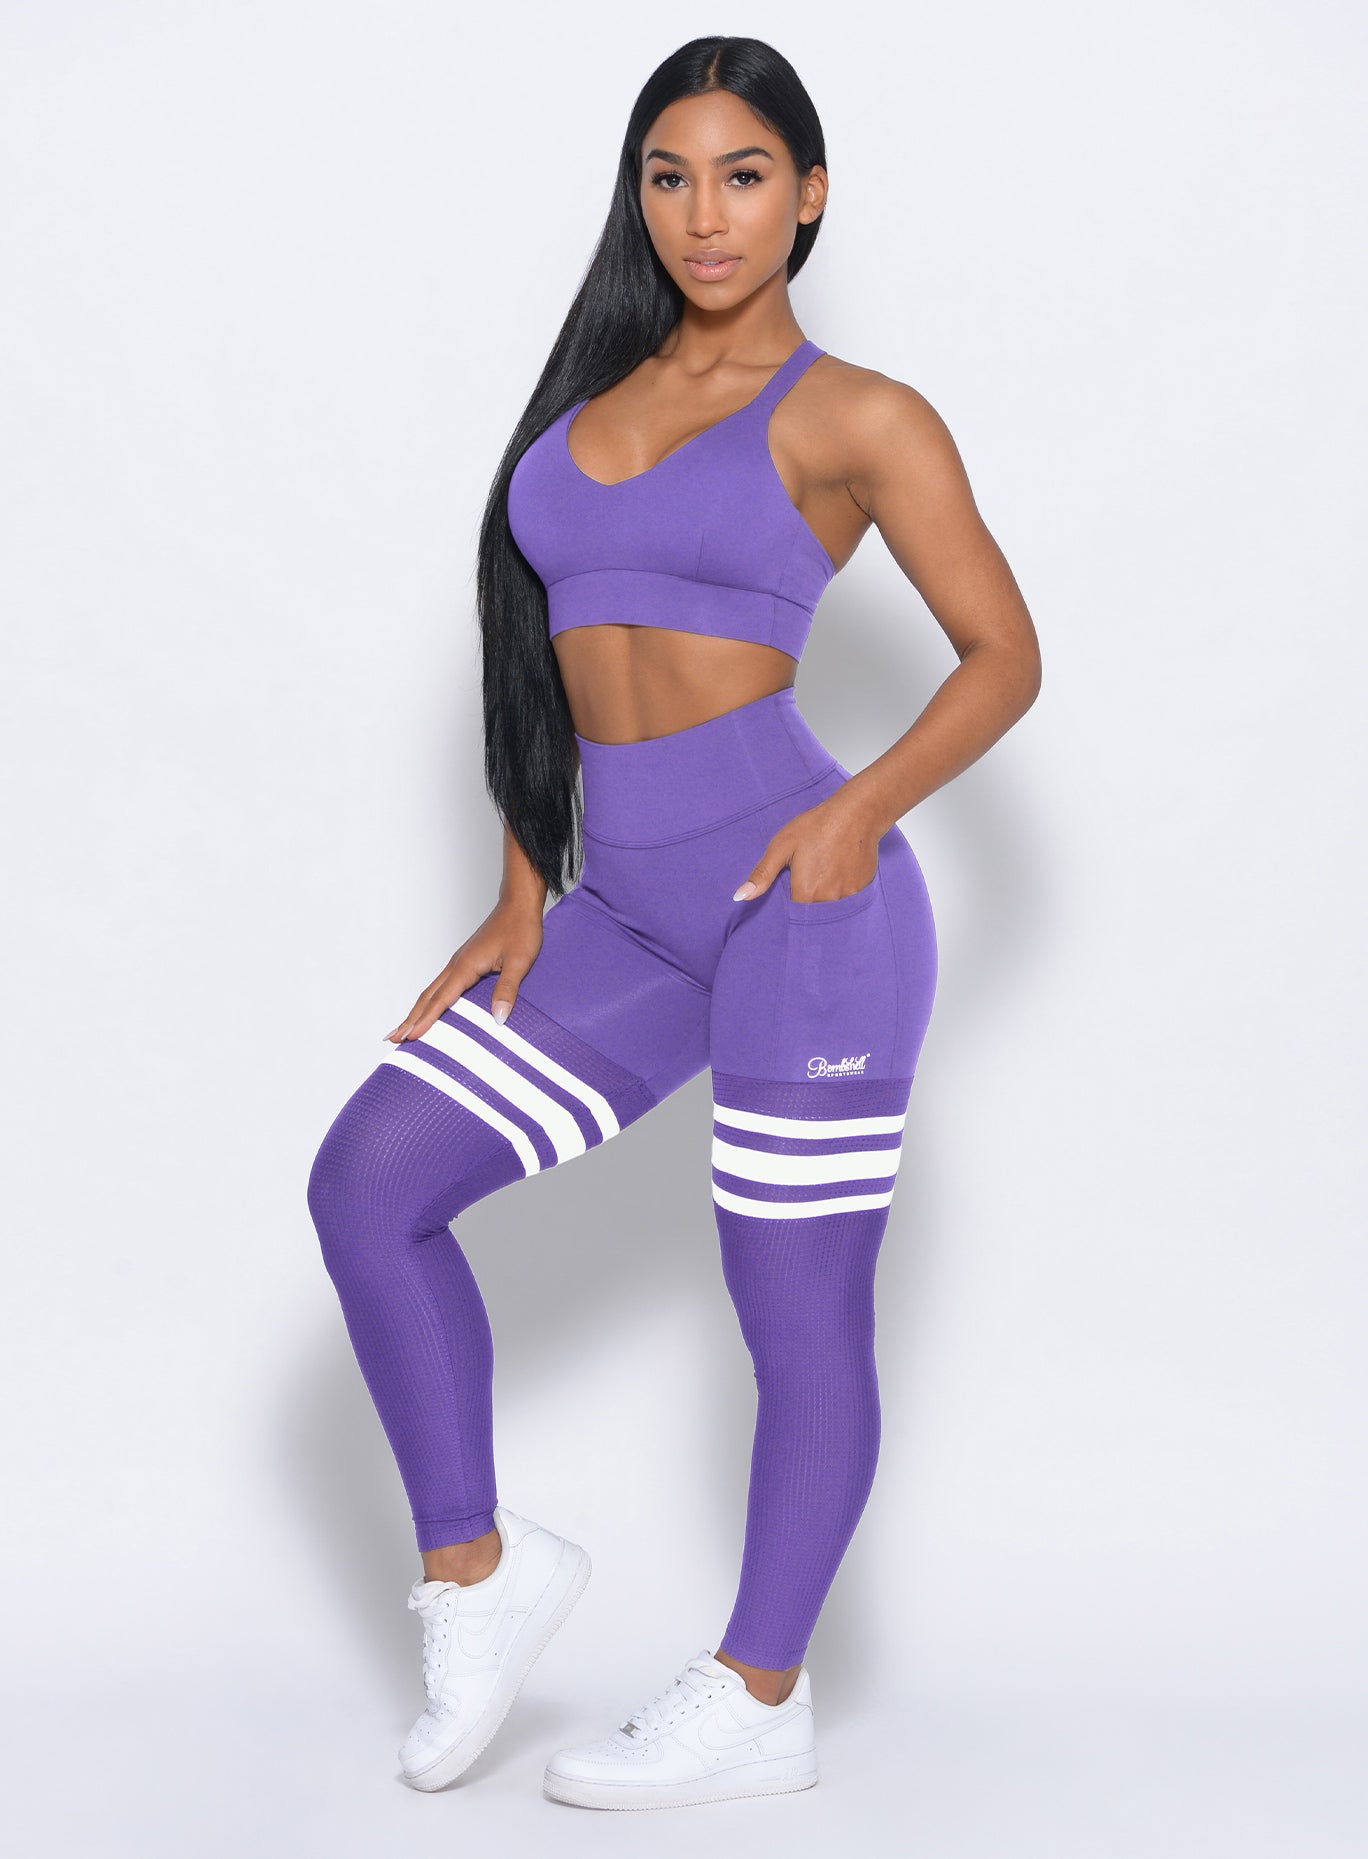 Model facing forward wearing our perform thigh highs in royal purple color with three white stripes on thighs and a matching bra